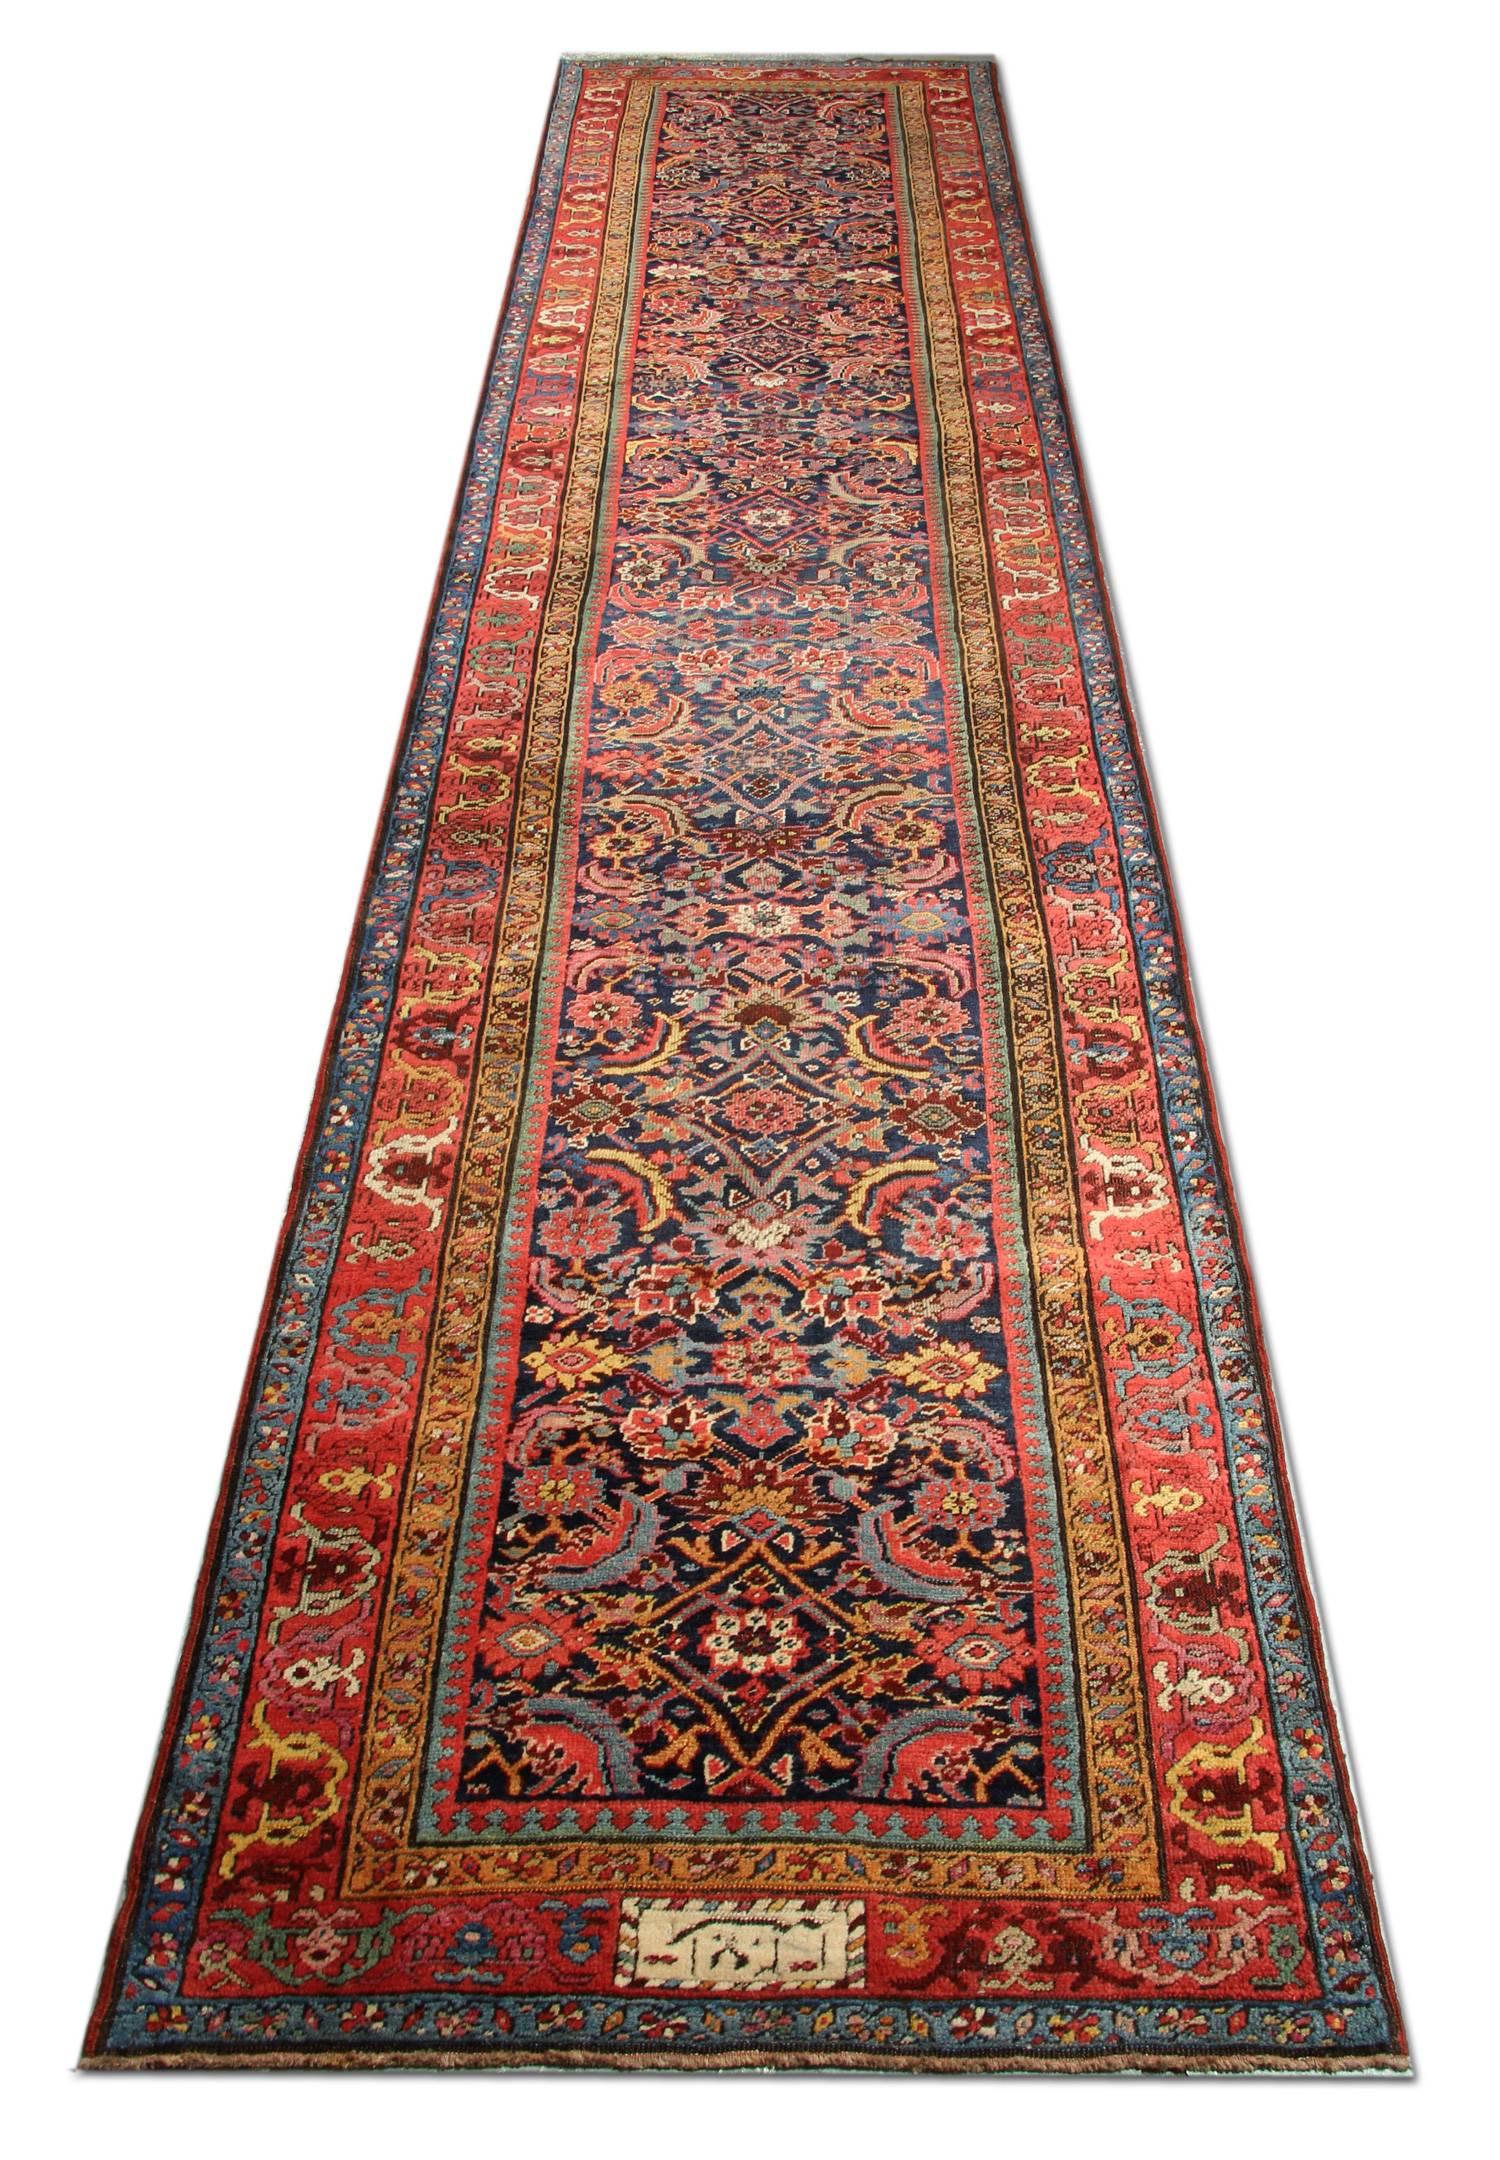 Handmade carpet Caucasian runner rug unique and vintage rugs carpet runner is primarily produced as city productions pieces. Made from materials particular to individual tribal provinces and the living room rugs of the Caucasus normally display bold